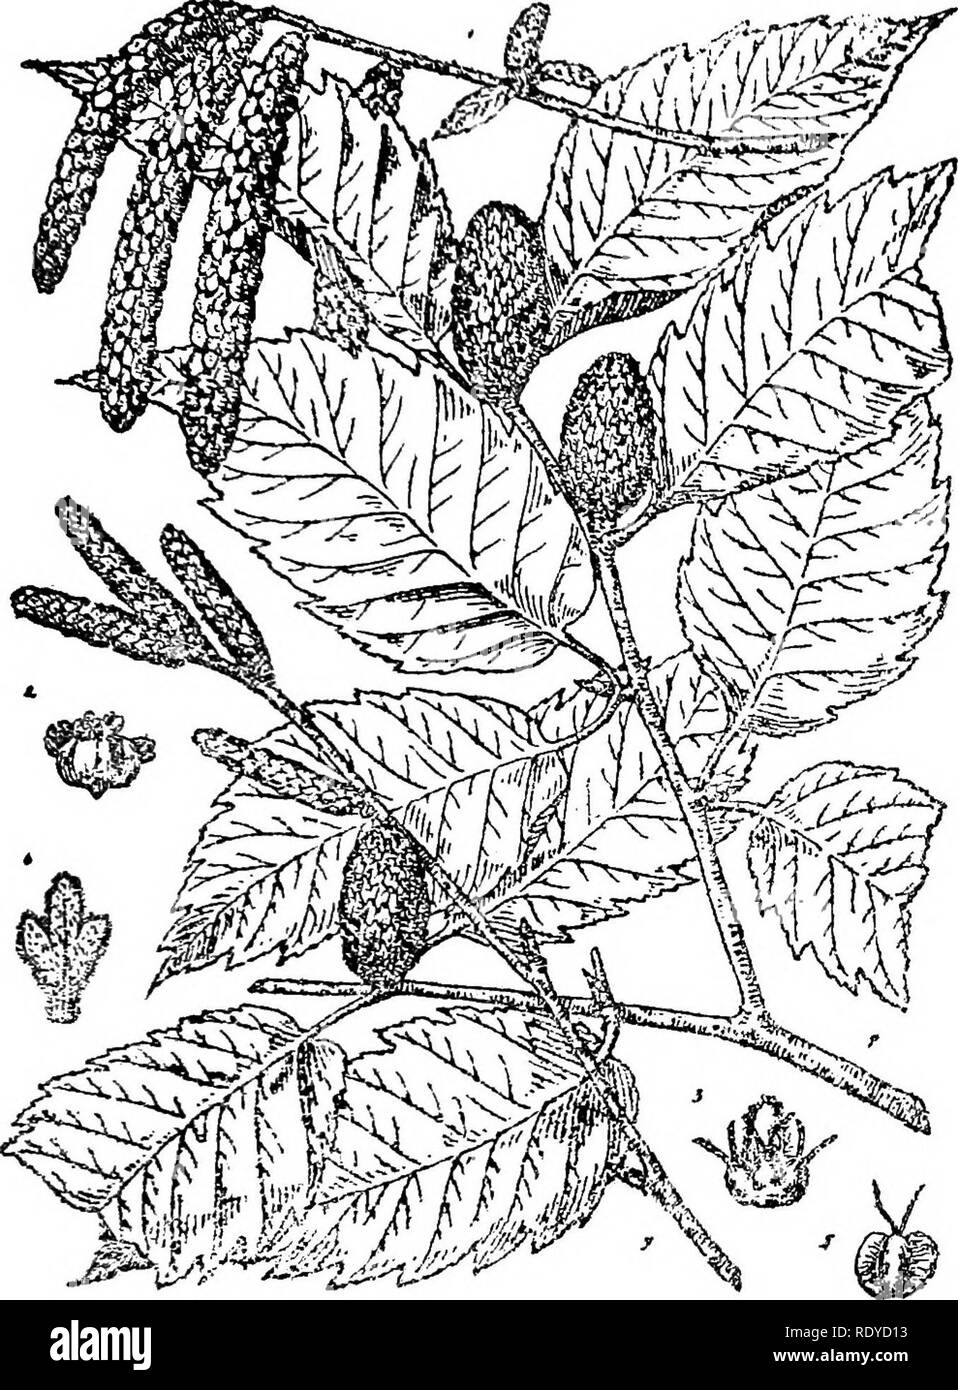 . A manual of poisonous plants, chiefly of eastern North America, with brief notes on economic and medicinal plants, and numerous illustrations. Poisonous plants. SPERIVIATOPHYTAâURTICALES 405 Ulmaceae, the elms; Moraccac, the mulberries, and Urticaceae, the nettles. The Castlloa elastica of Mexico, the bread nut tree of Central America (Brosimum AUcasirum) and the Cecropia of tropical America furnish rubber.. ri^. 185. Yellow Bi^ch (Bc!jfli hi^ea). Flowering branch. 2. Â£tamin.ite flower, enlarged. 3. Pistillate flower, enlarged. 4. Fruit- ing branch. 5. Nut. enlarged. 6. Scale of fruiting ca Stock Photo